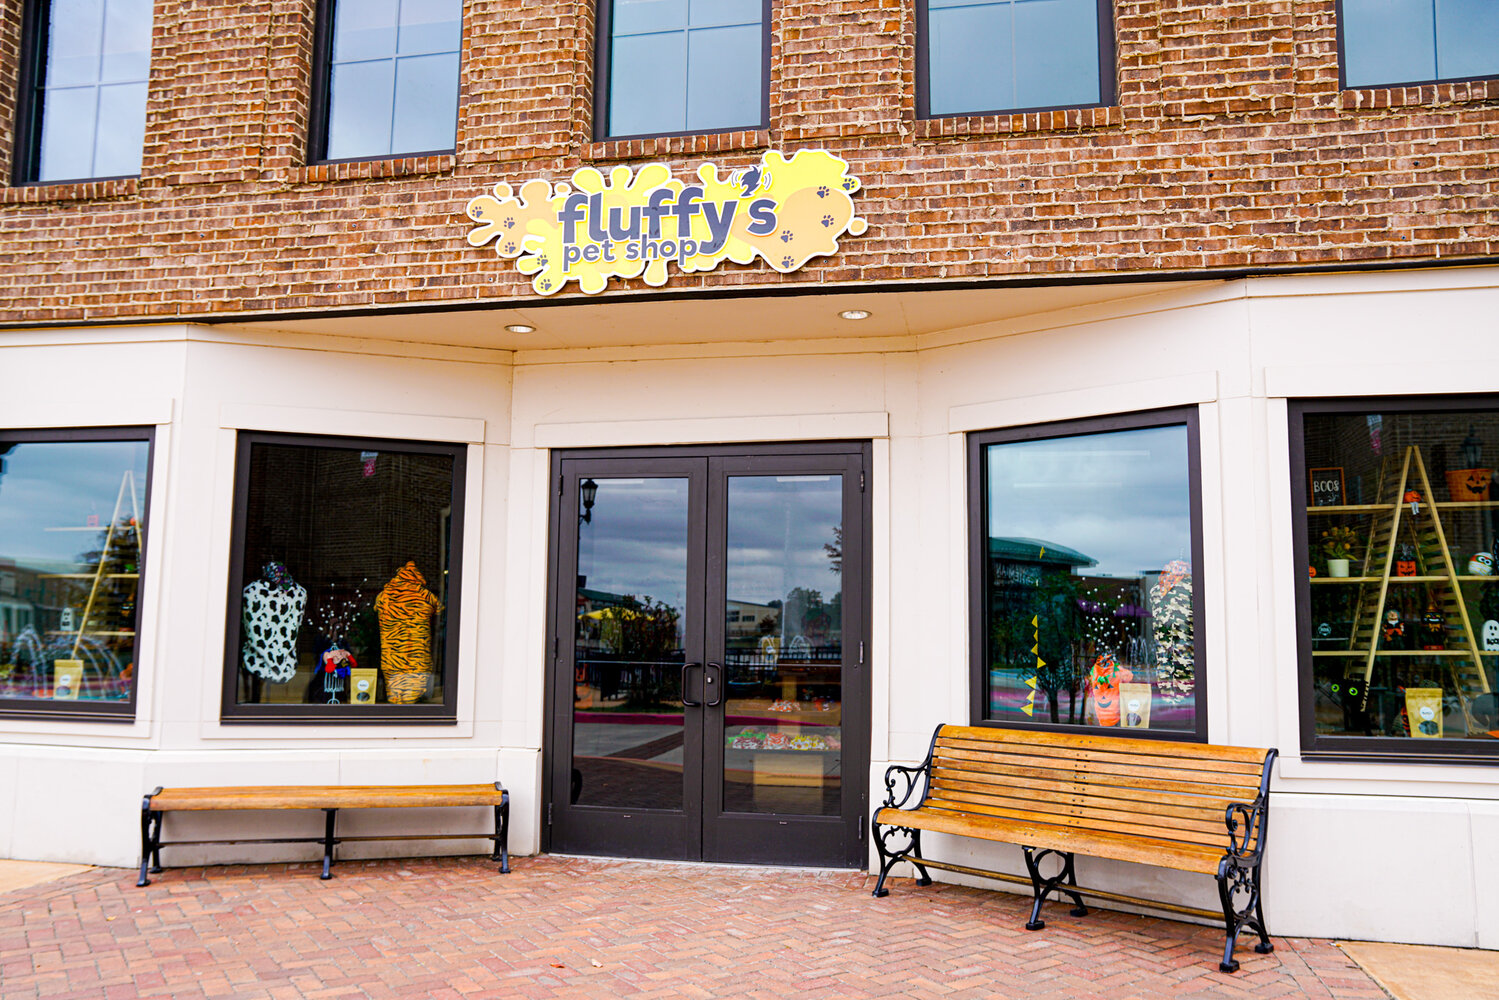 Pet owners will delight in the opportunity to spoil their pooch at Fluffy's Pet Shop.